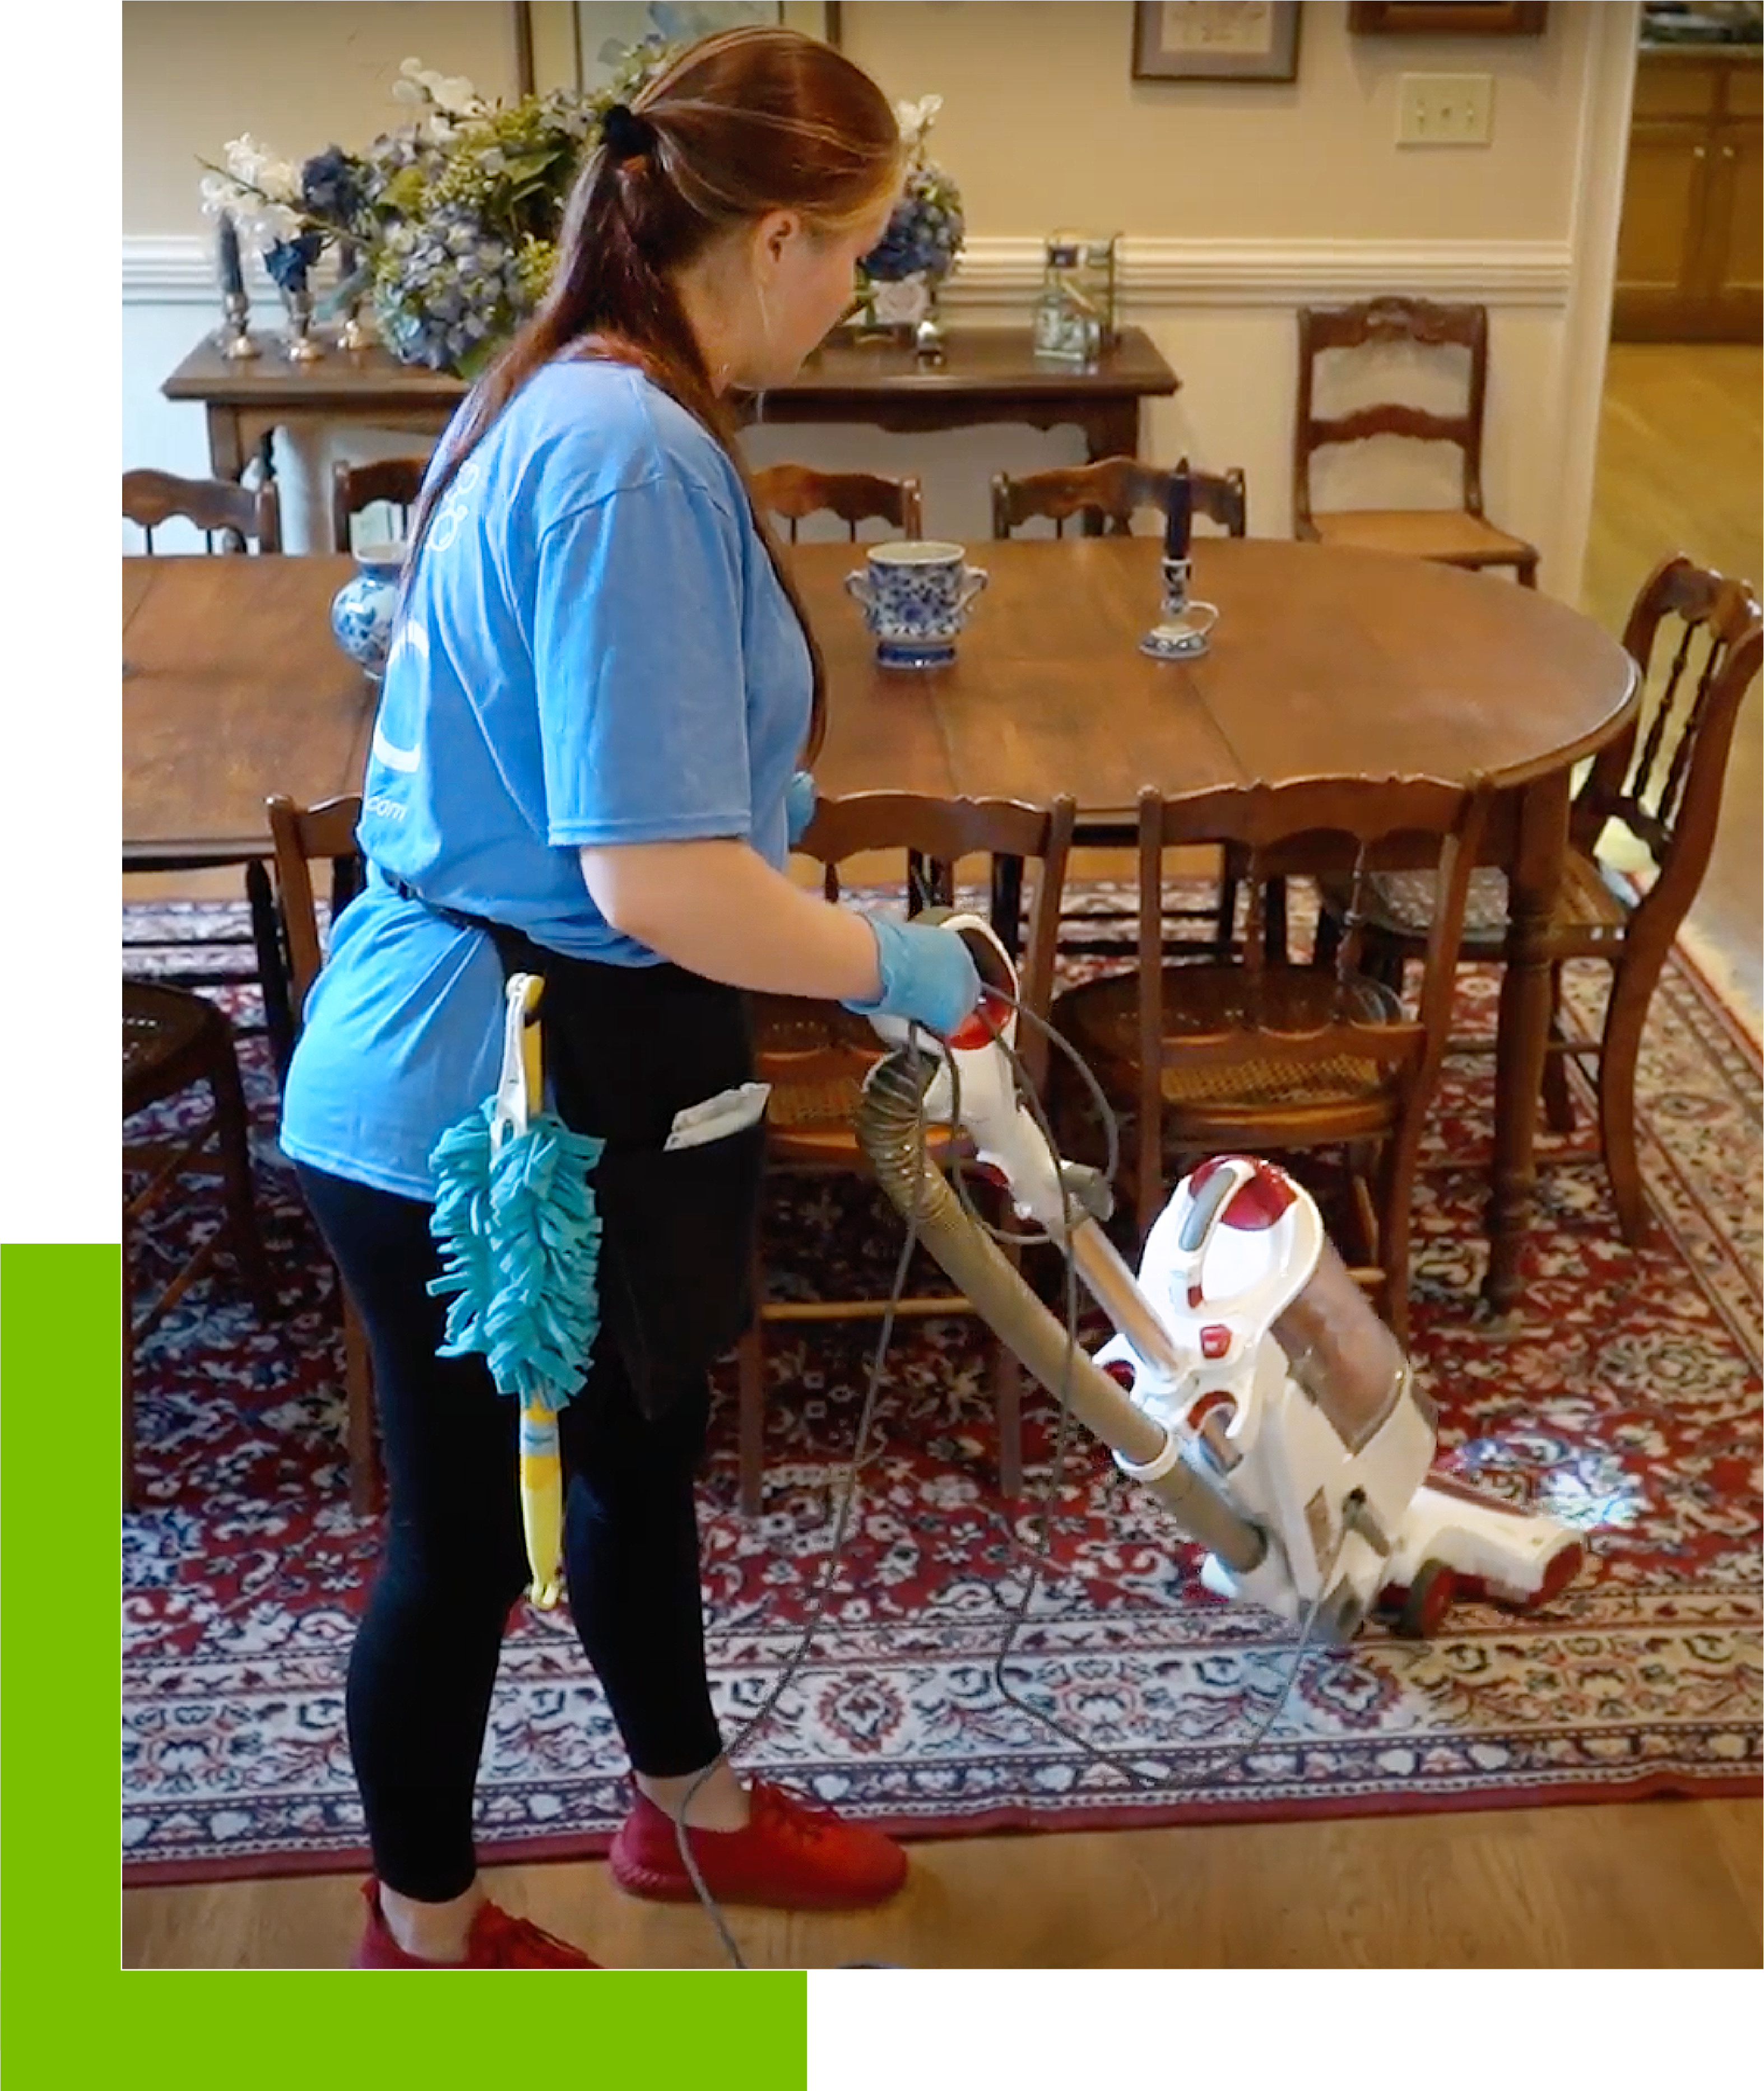 Looking for house cleaning services near me in Loganville, GA?